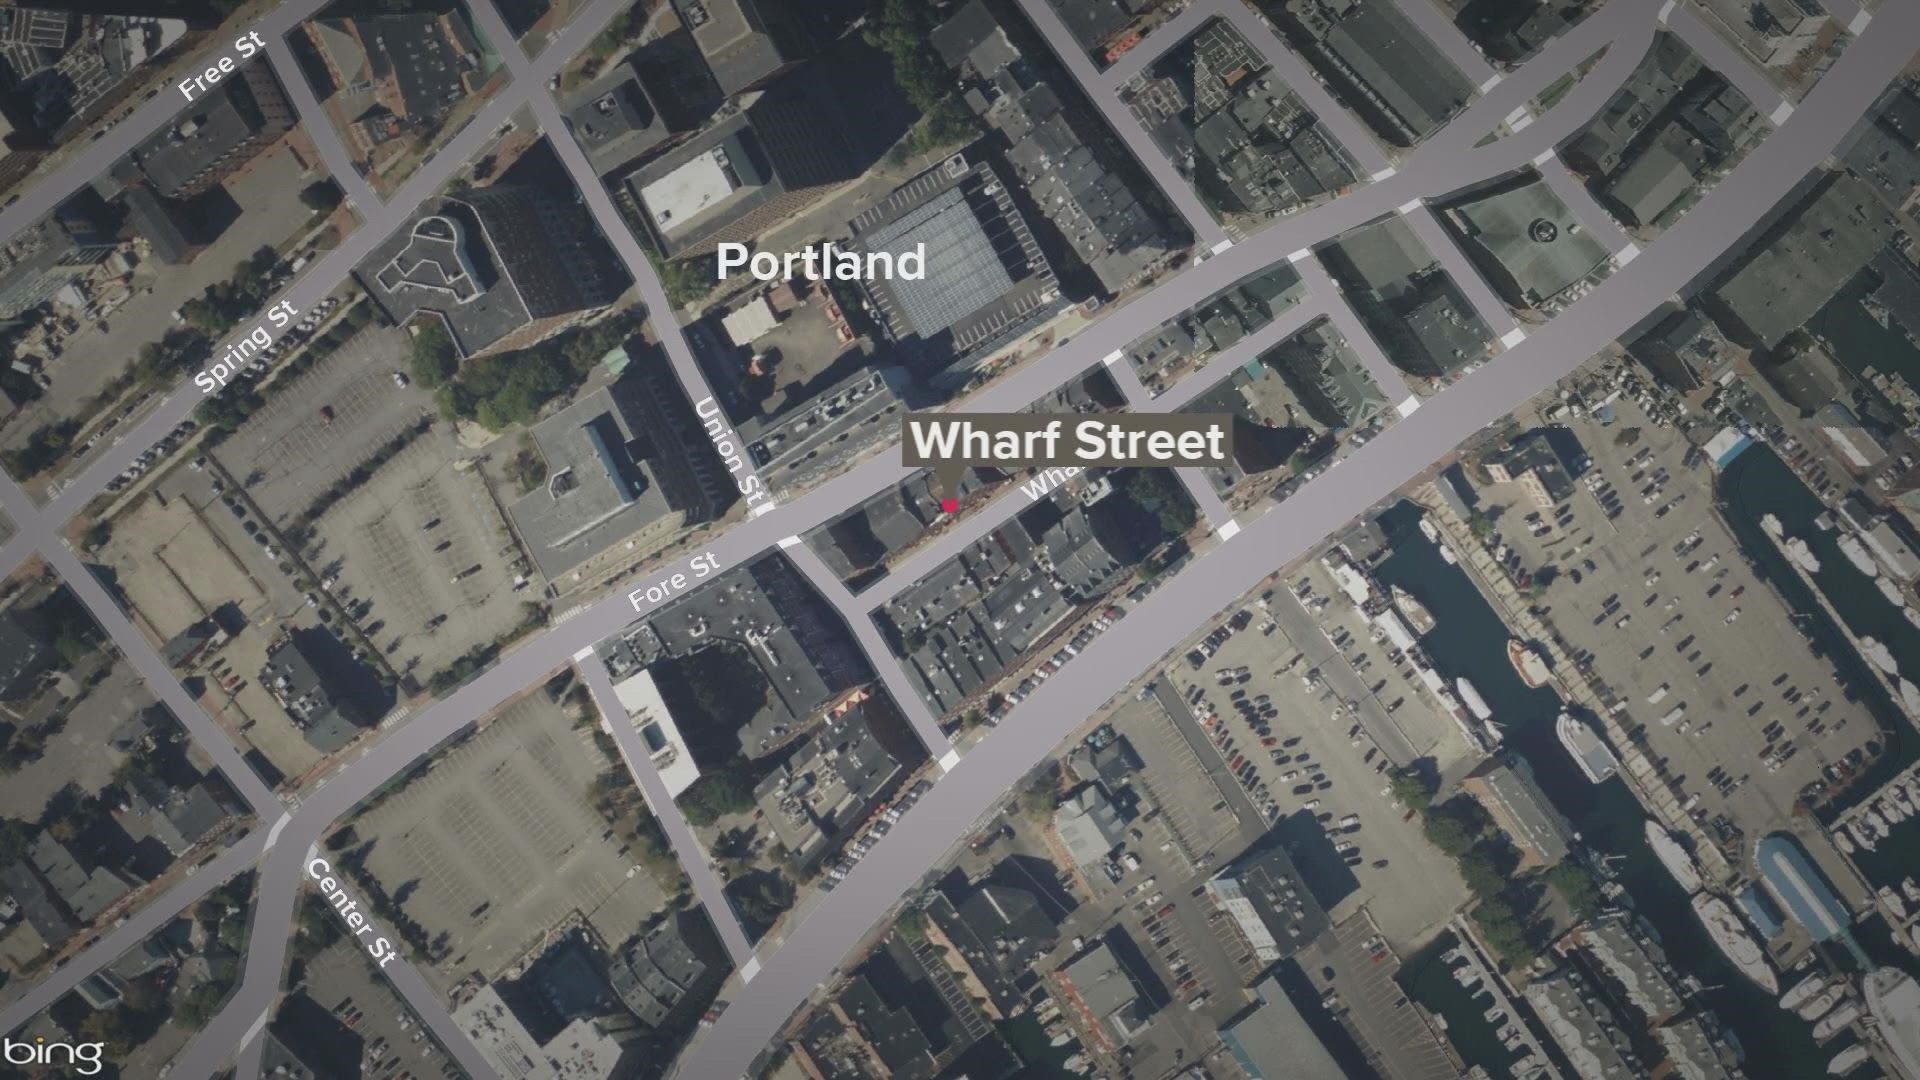 Two people were shot multiple times in the area of Wharf Street early Monday morning. Both were taken to Maine Medical Center with serious injuries.